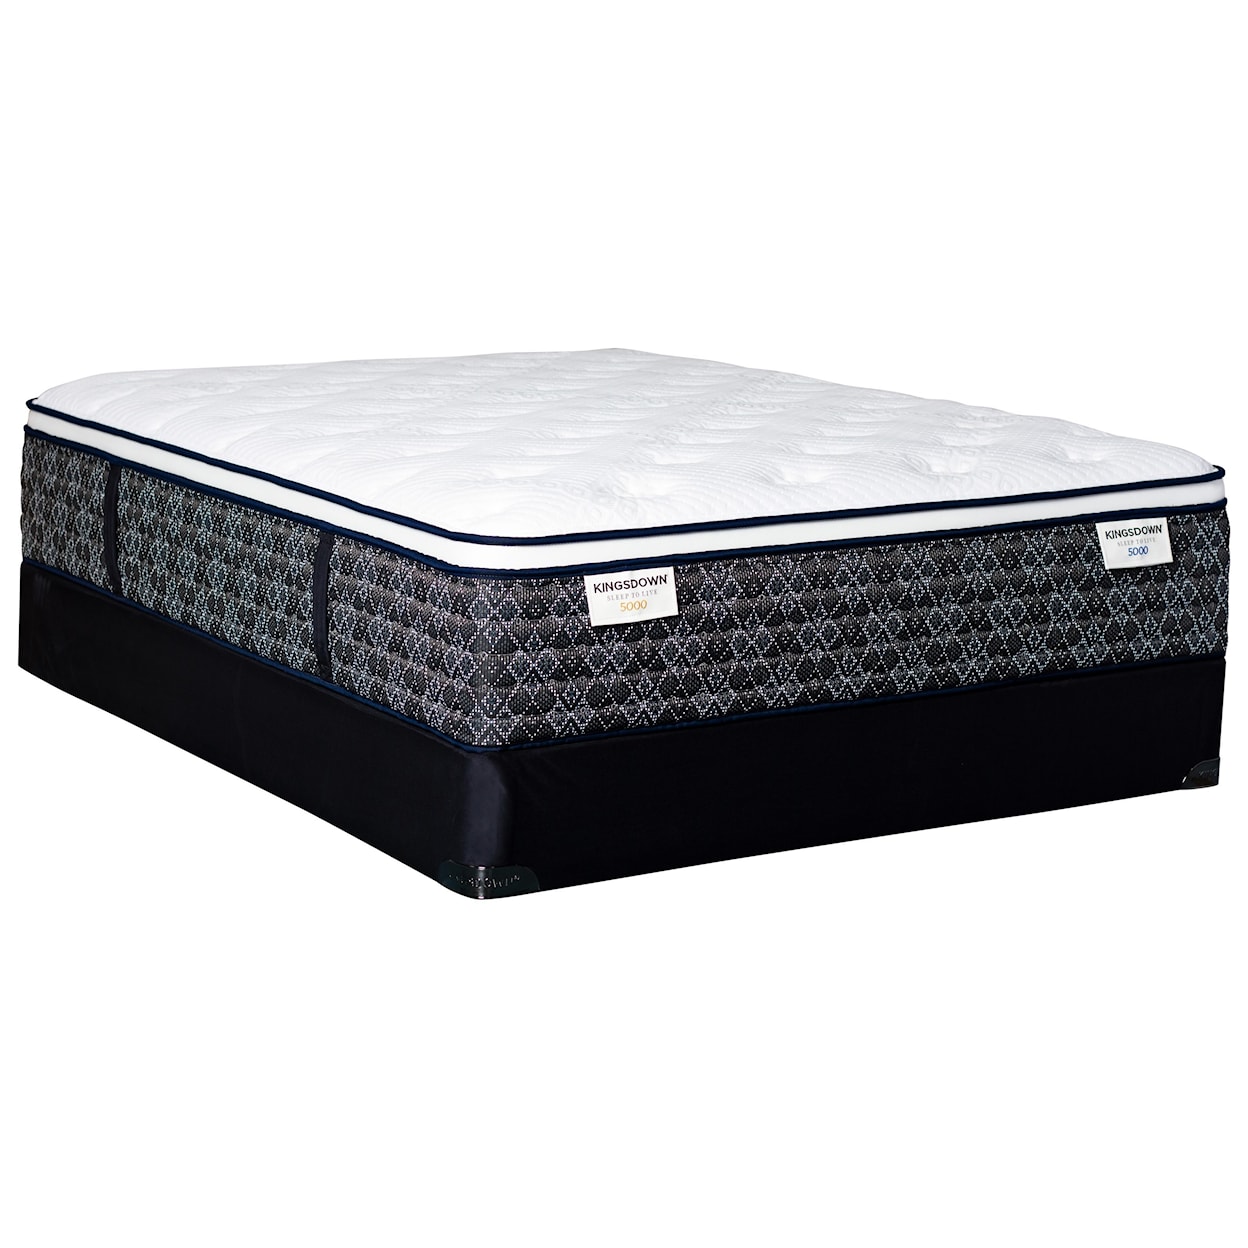 Kingsdown Sleep to Live 5000 Green Red ET King Pocketed Coil Mattress Set